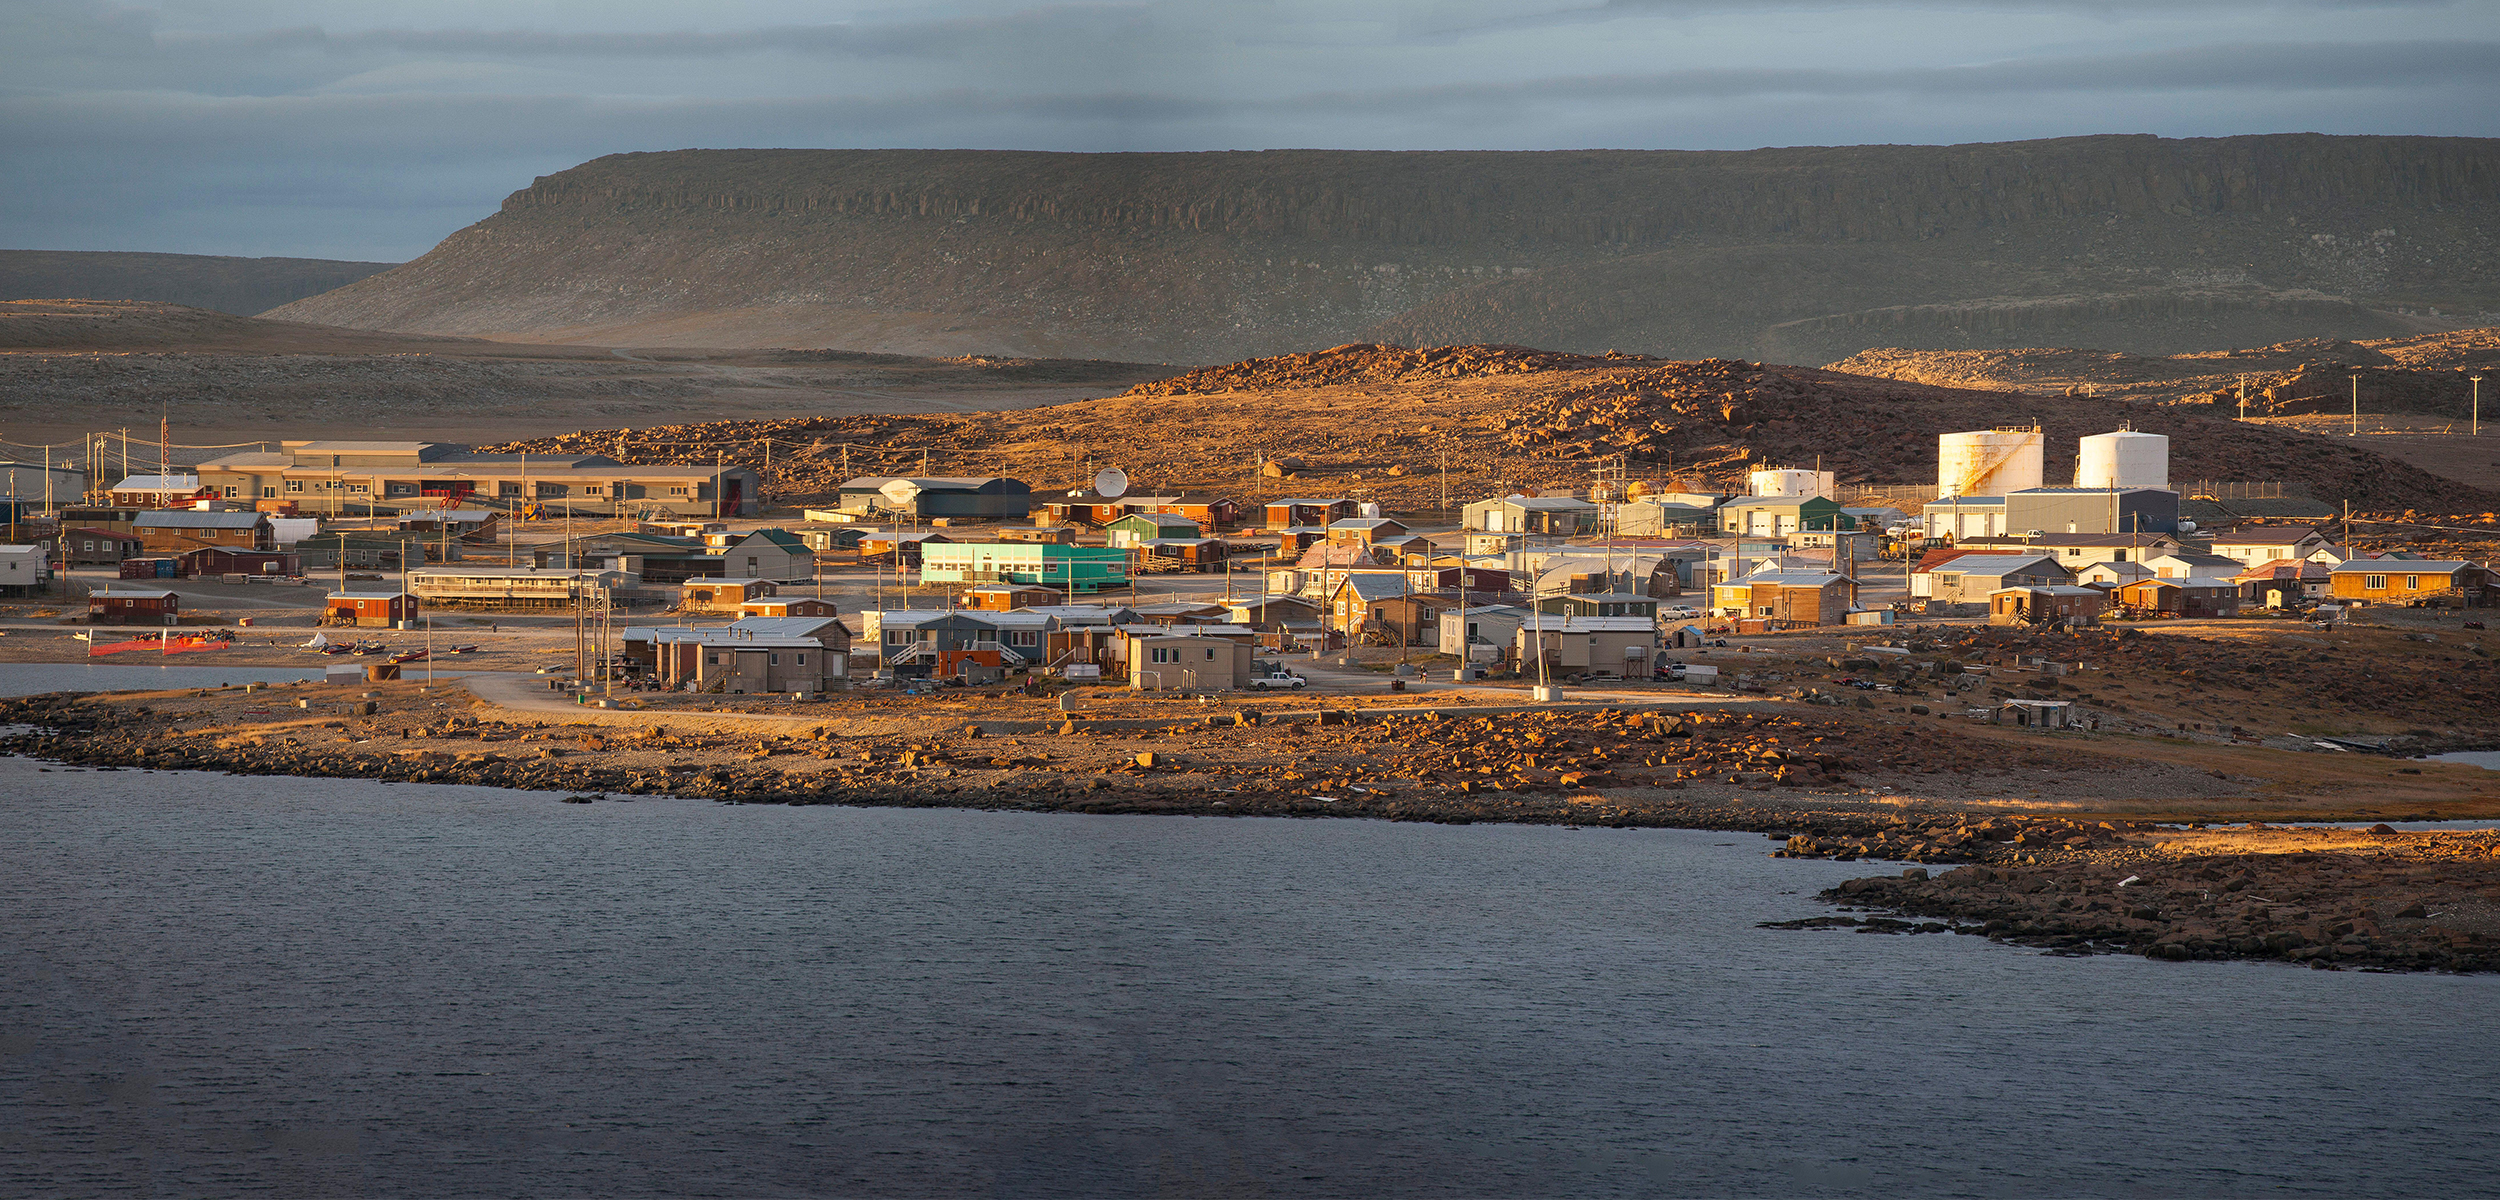 A shot from across the water of a small village of homes in a landscape of small brown rollling hills in the tundra.